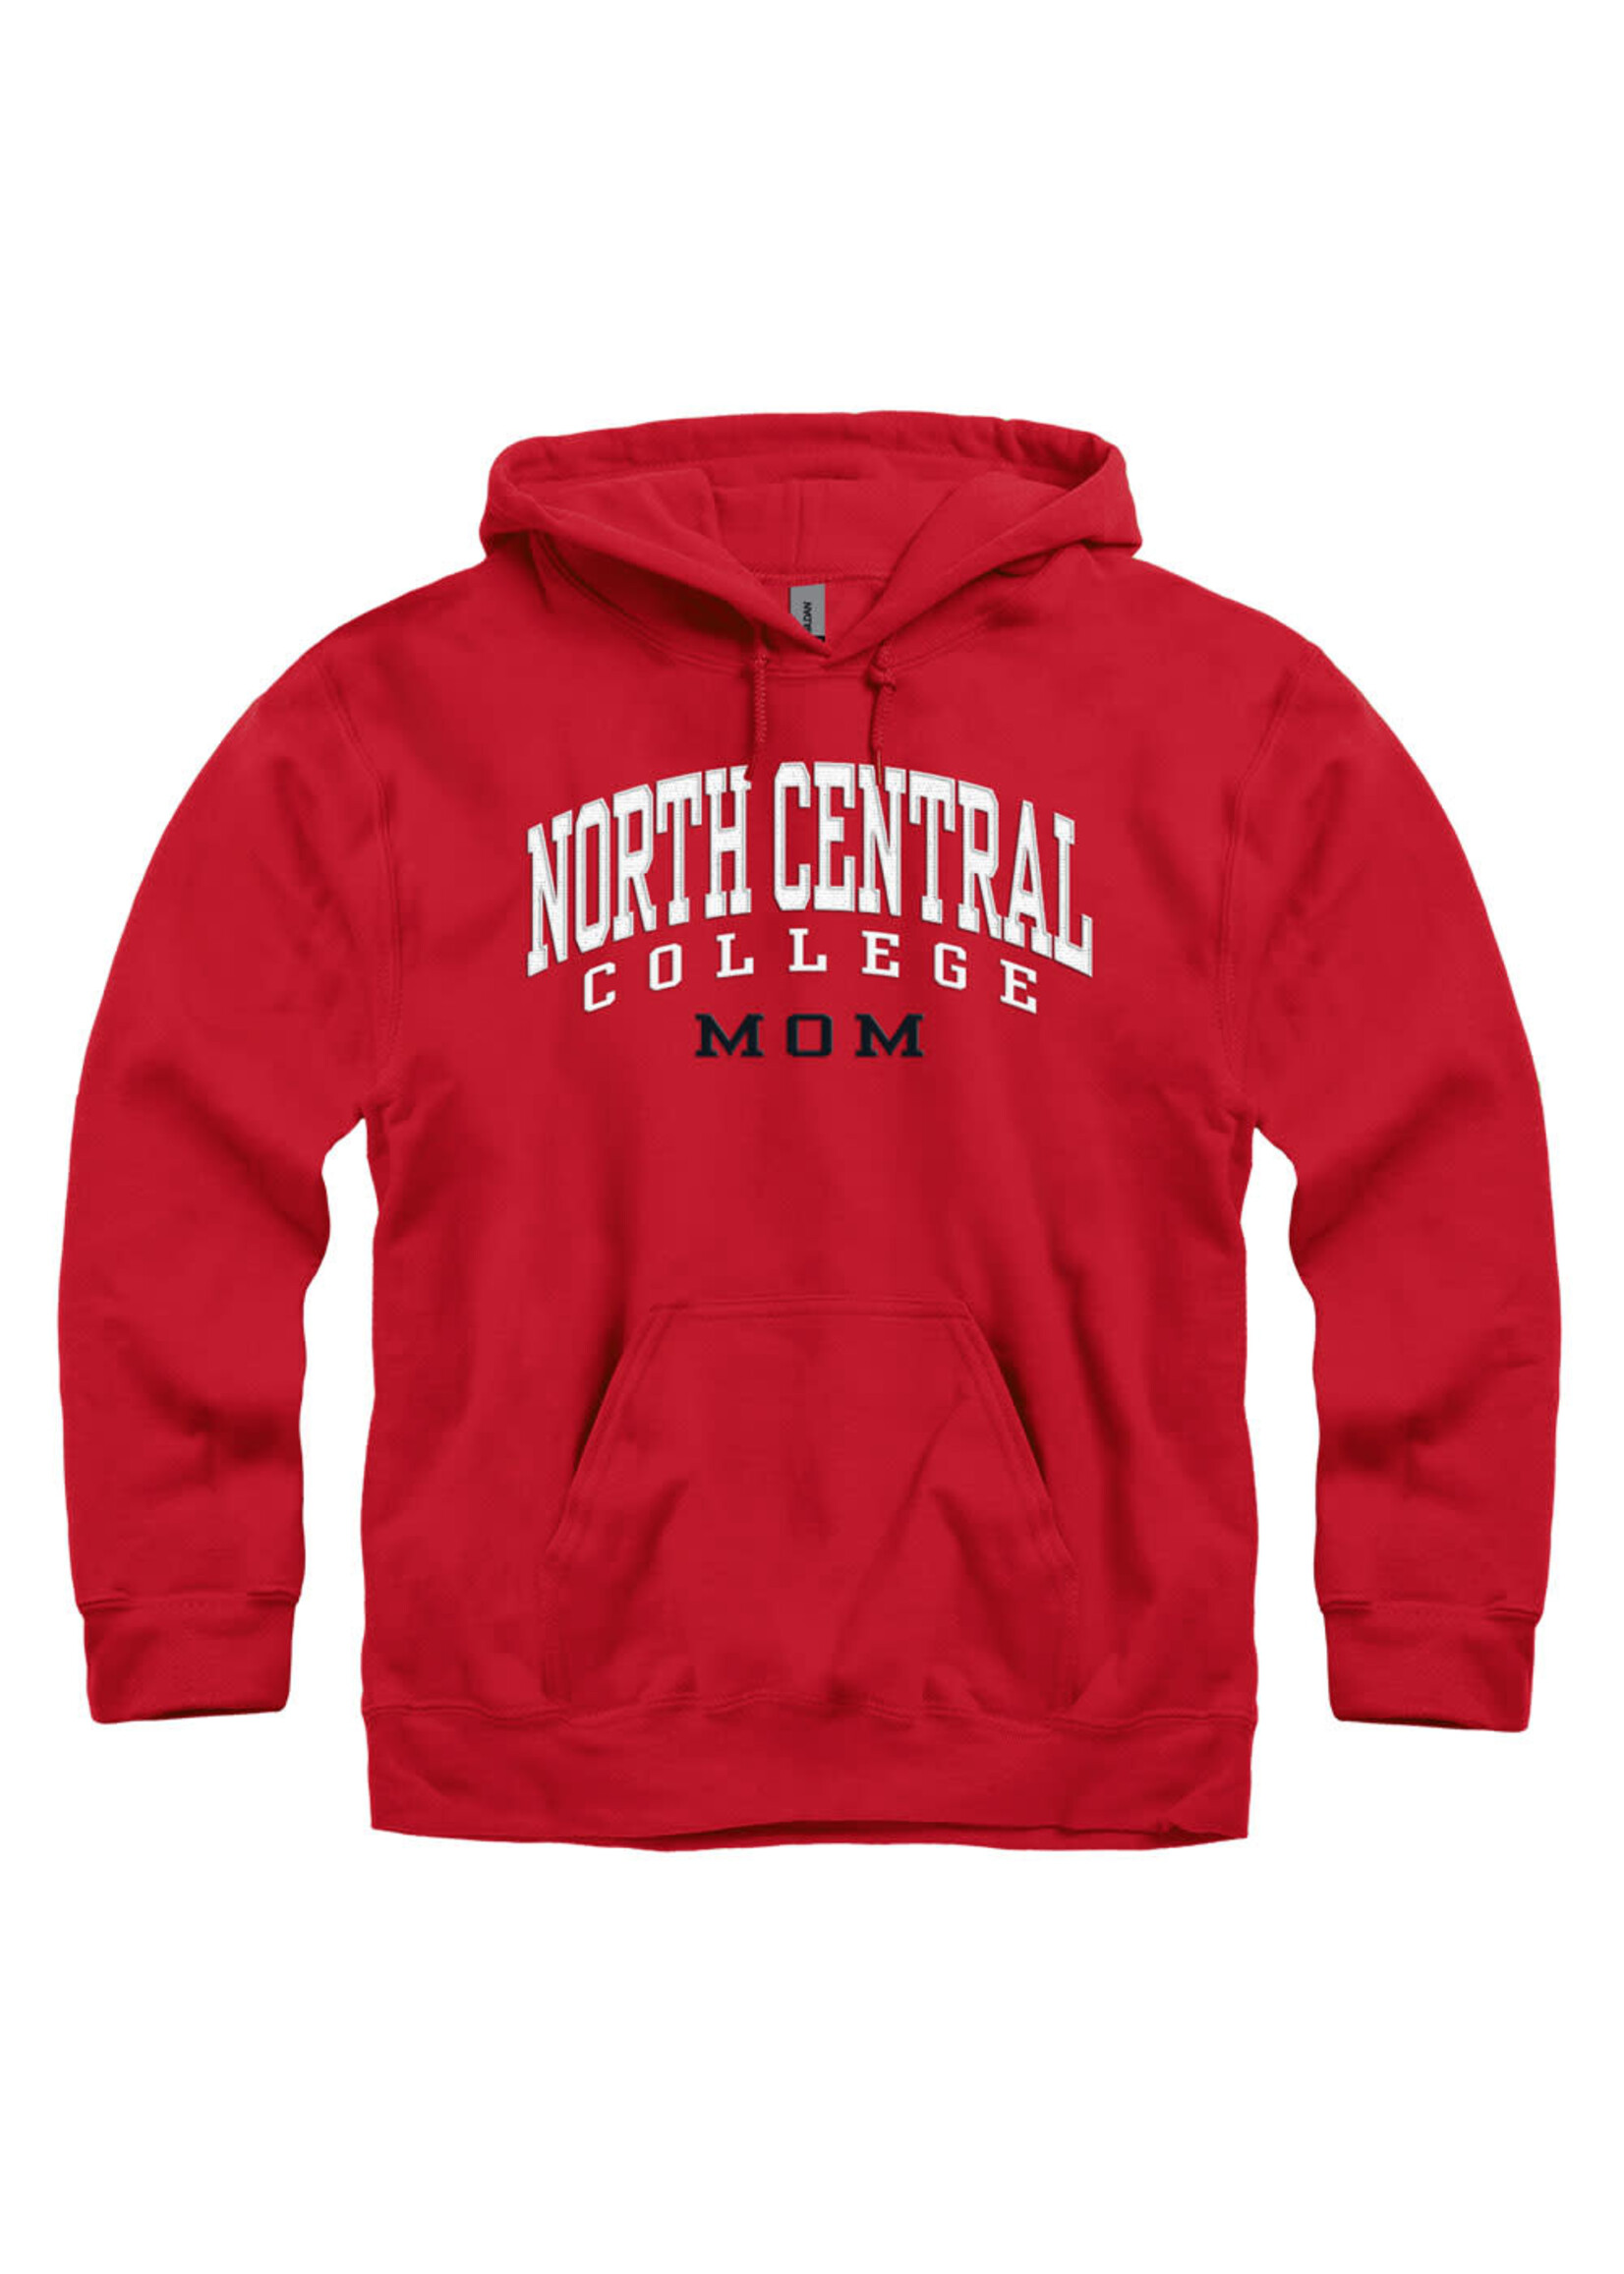 New Agenda New Agenda Mom Hoodie with embroidery - Red